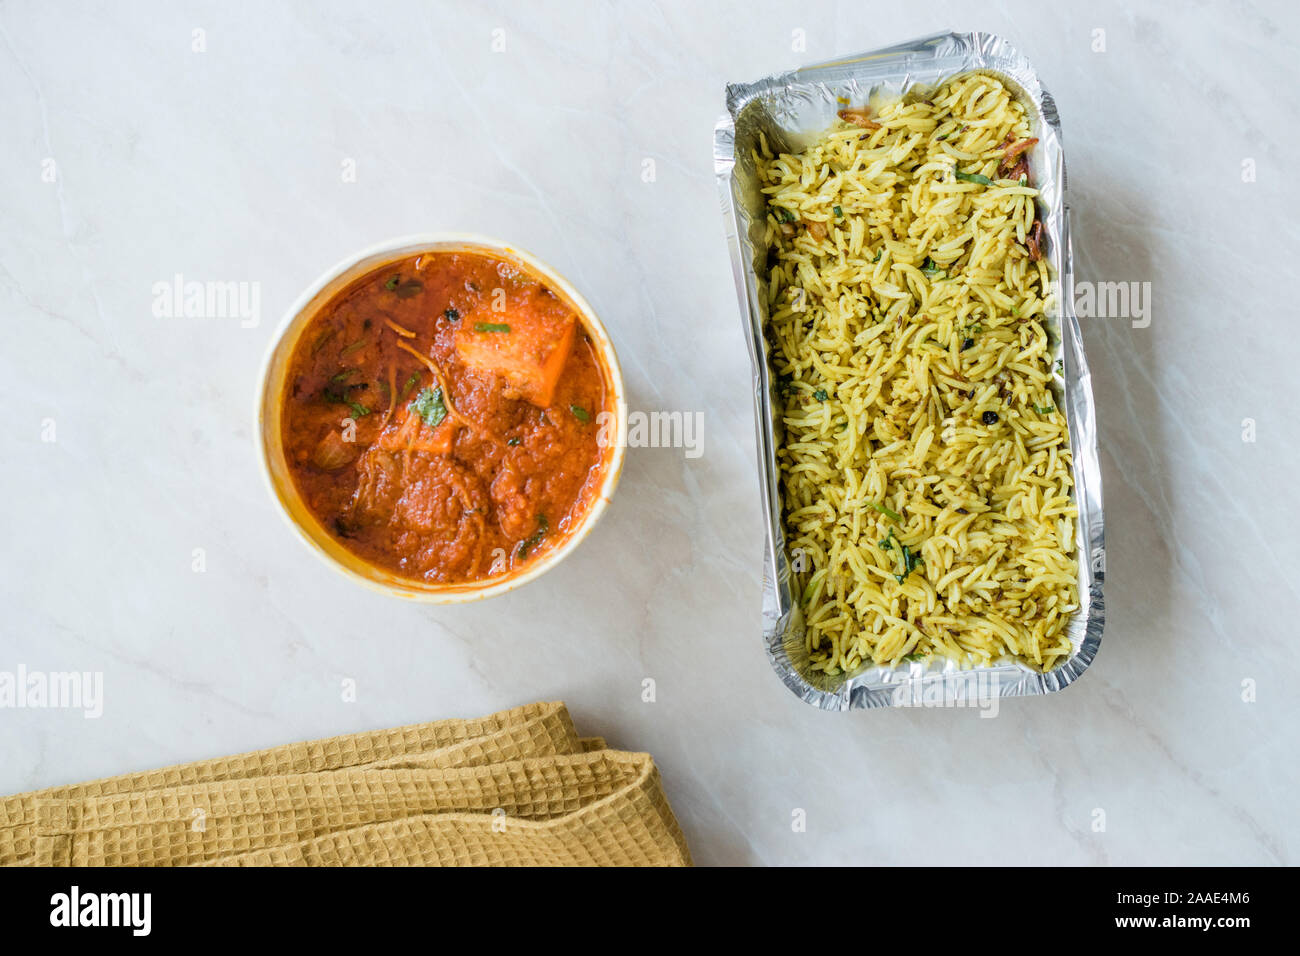 Take Away Indian Food Paneer Butter Tikka Masala / Cheese Cottage Curry and Jeera Zira Rice Basmati Pilaf or Pilav in Plastic Box Package / Container. Stock Photo